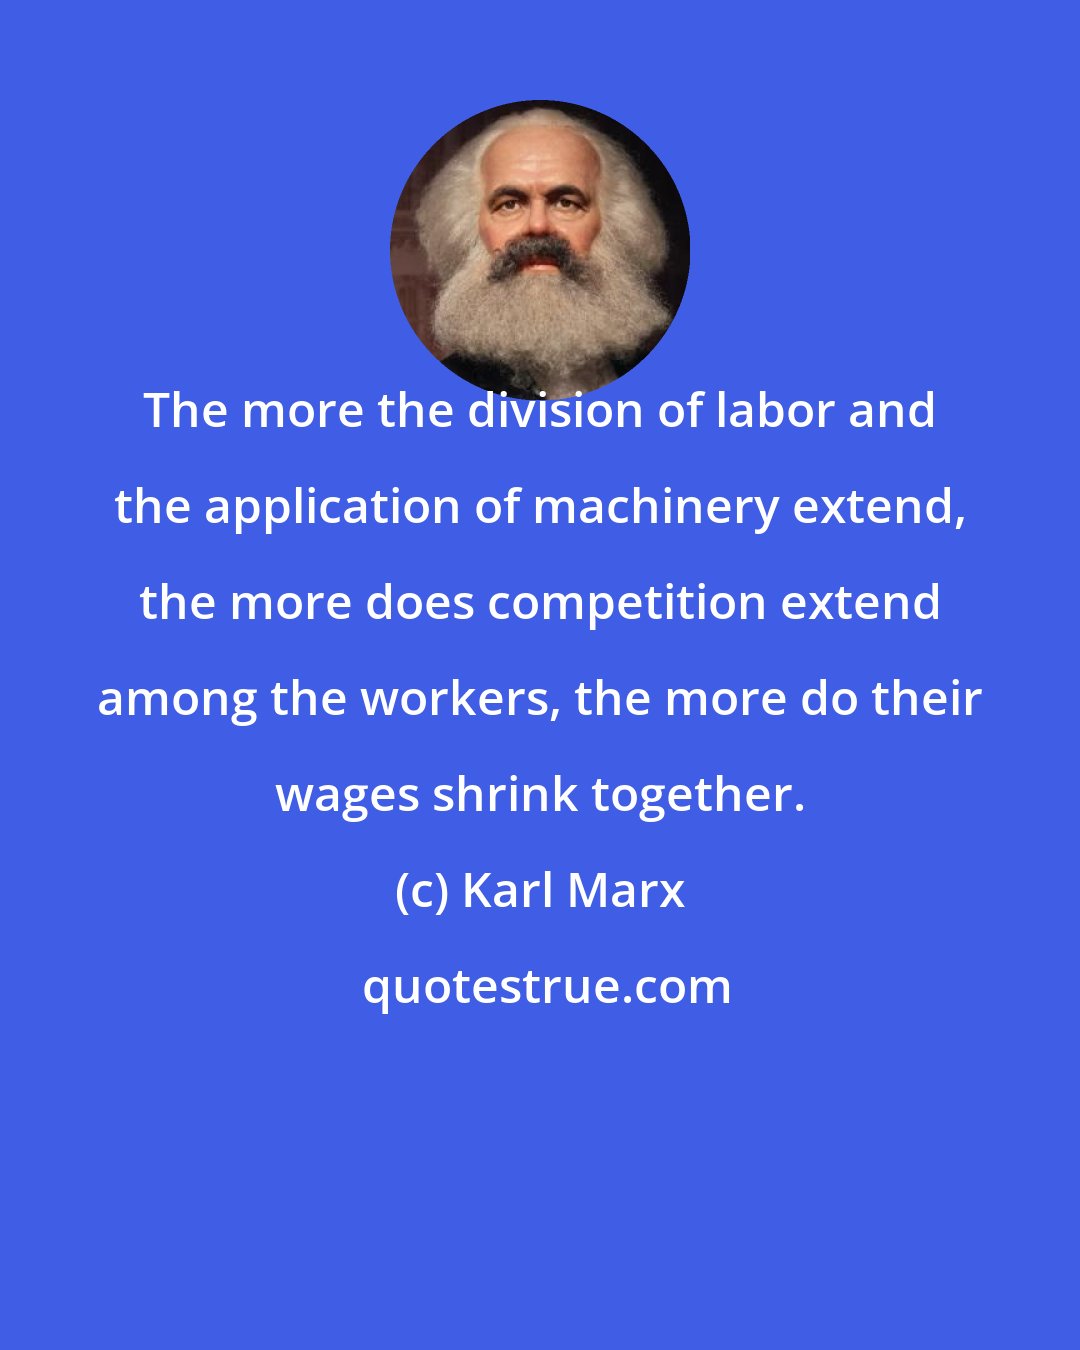 Karl Marx: The more the division of labor and the application of machinery extend, the more does competition extend among the workers, the more do their wages shrink together.